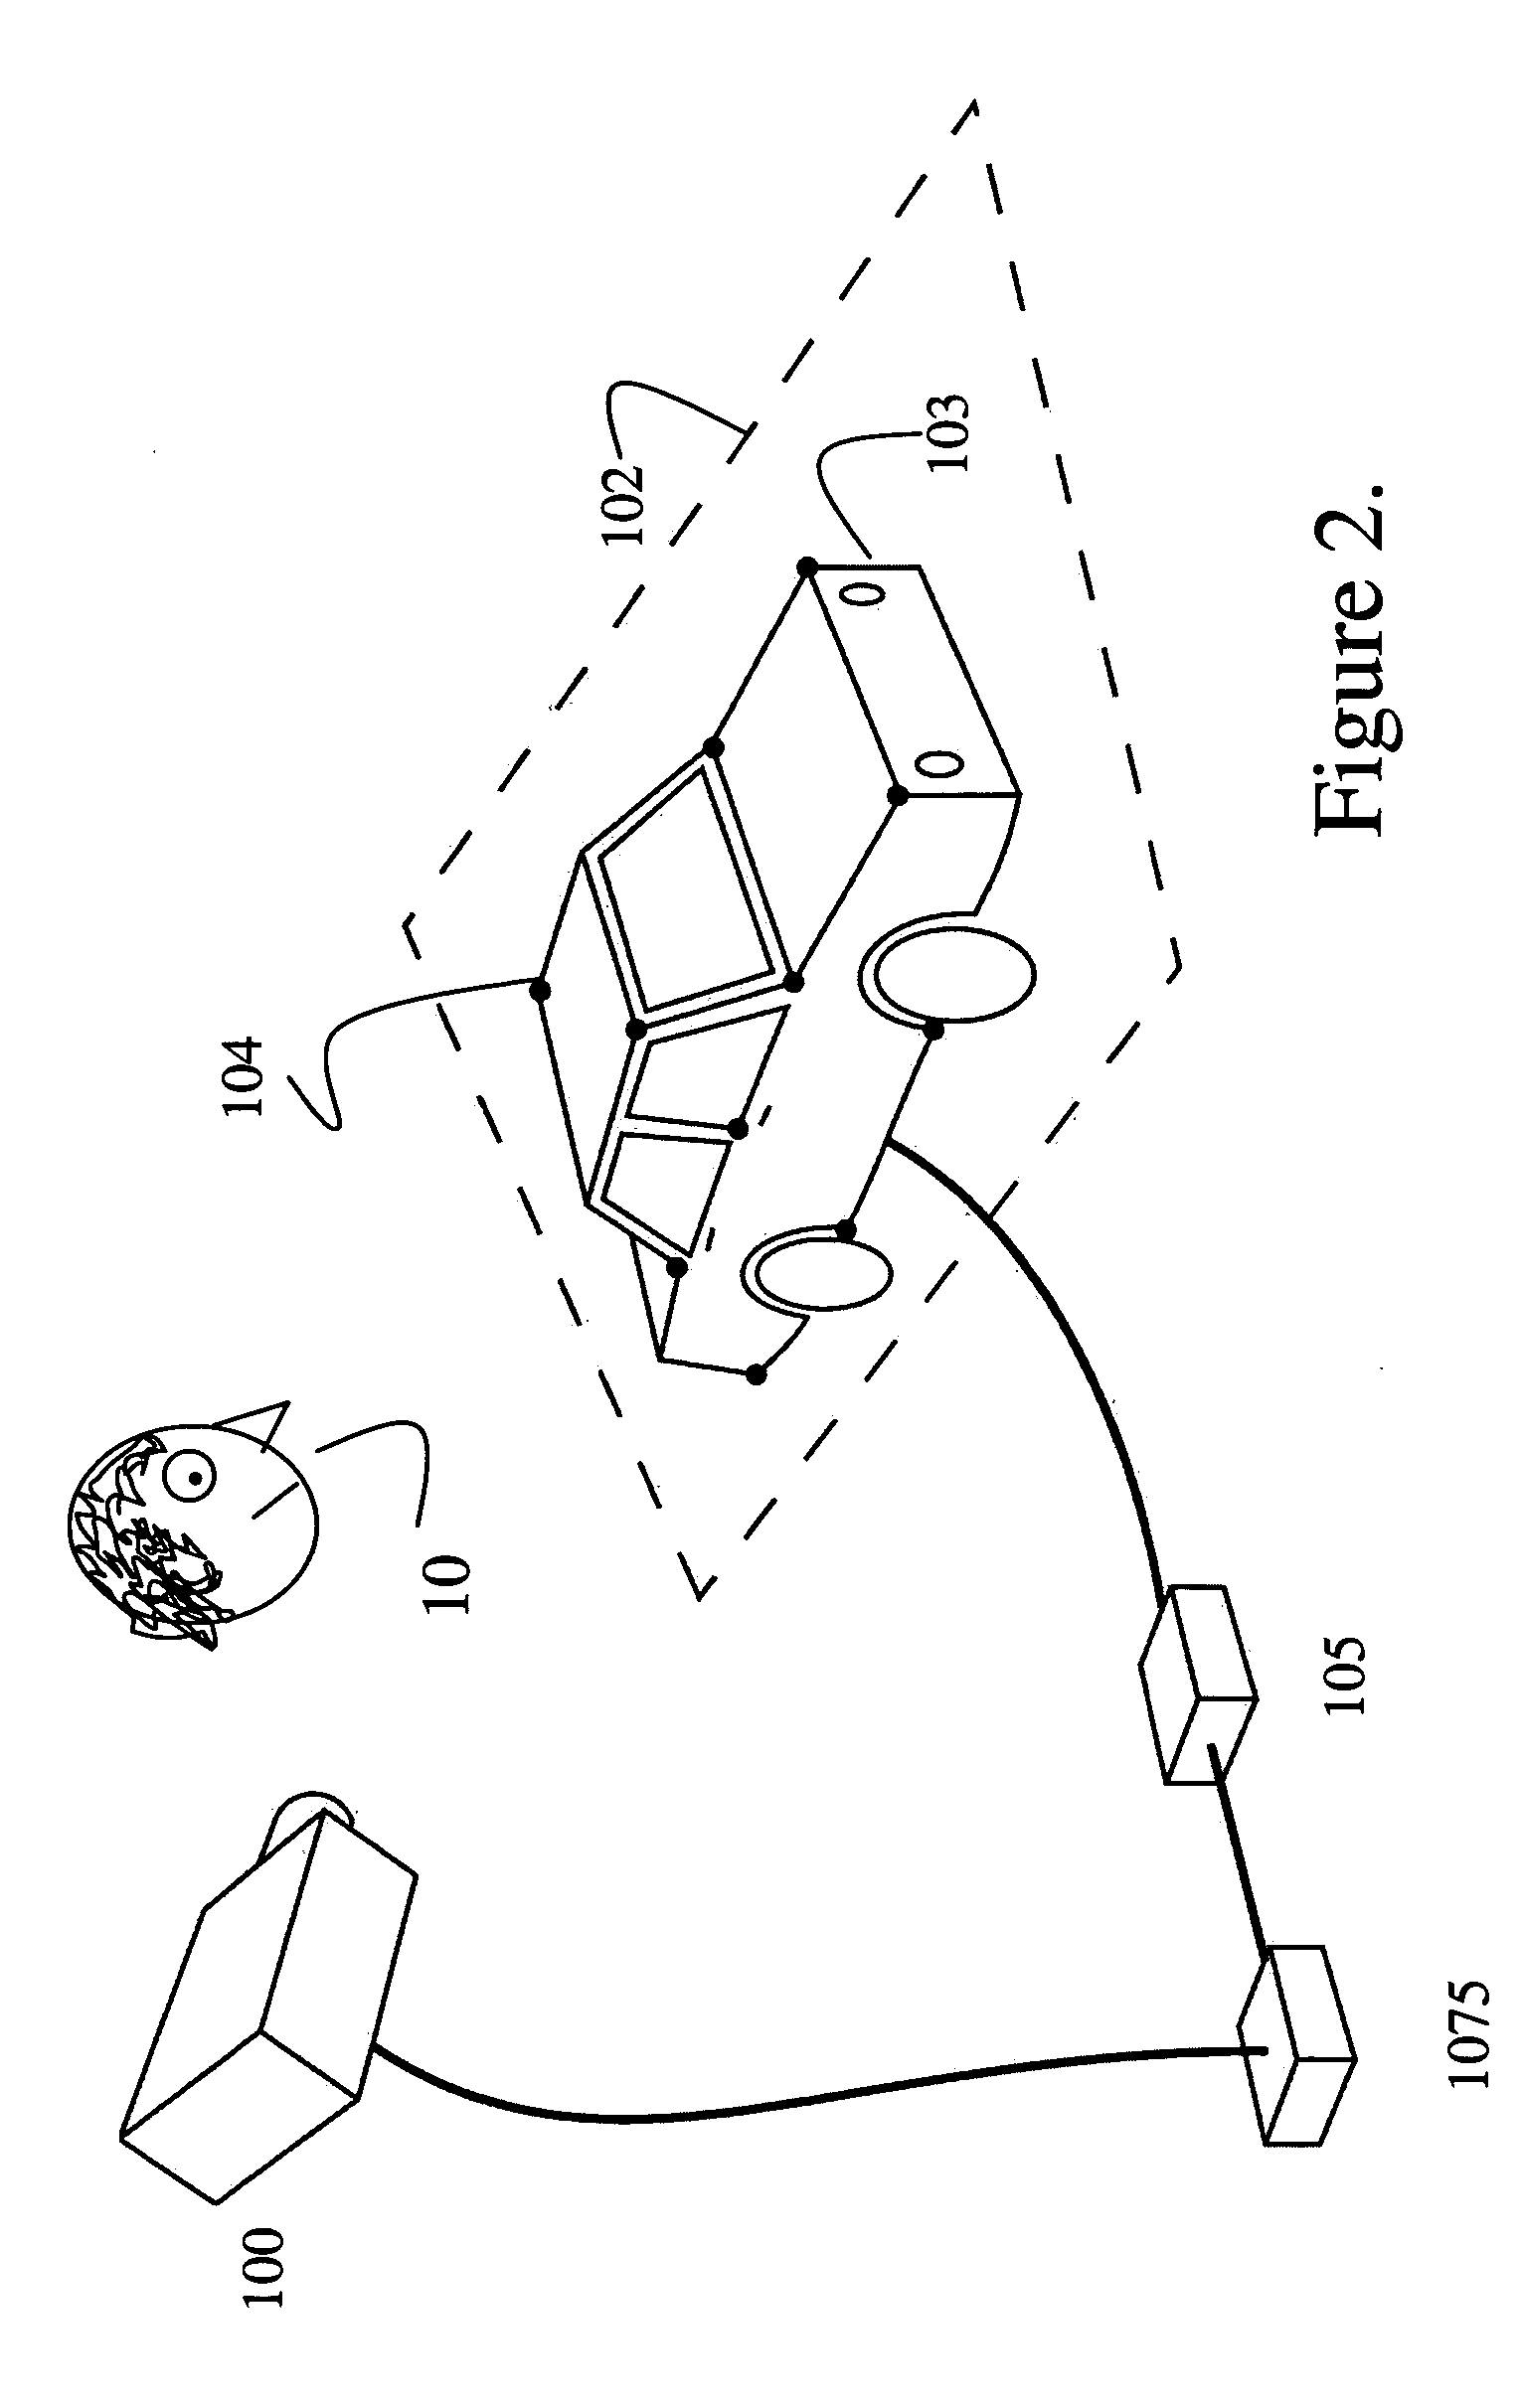 Method and system for calibrating projectors to arbitrarily shaped surfaces with discrete optical sensors mounted at the surfaces